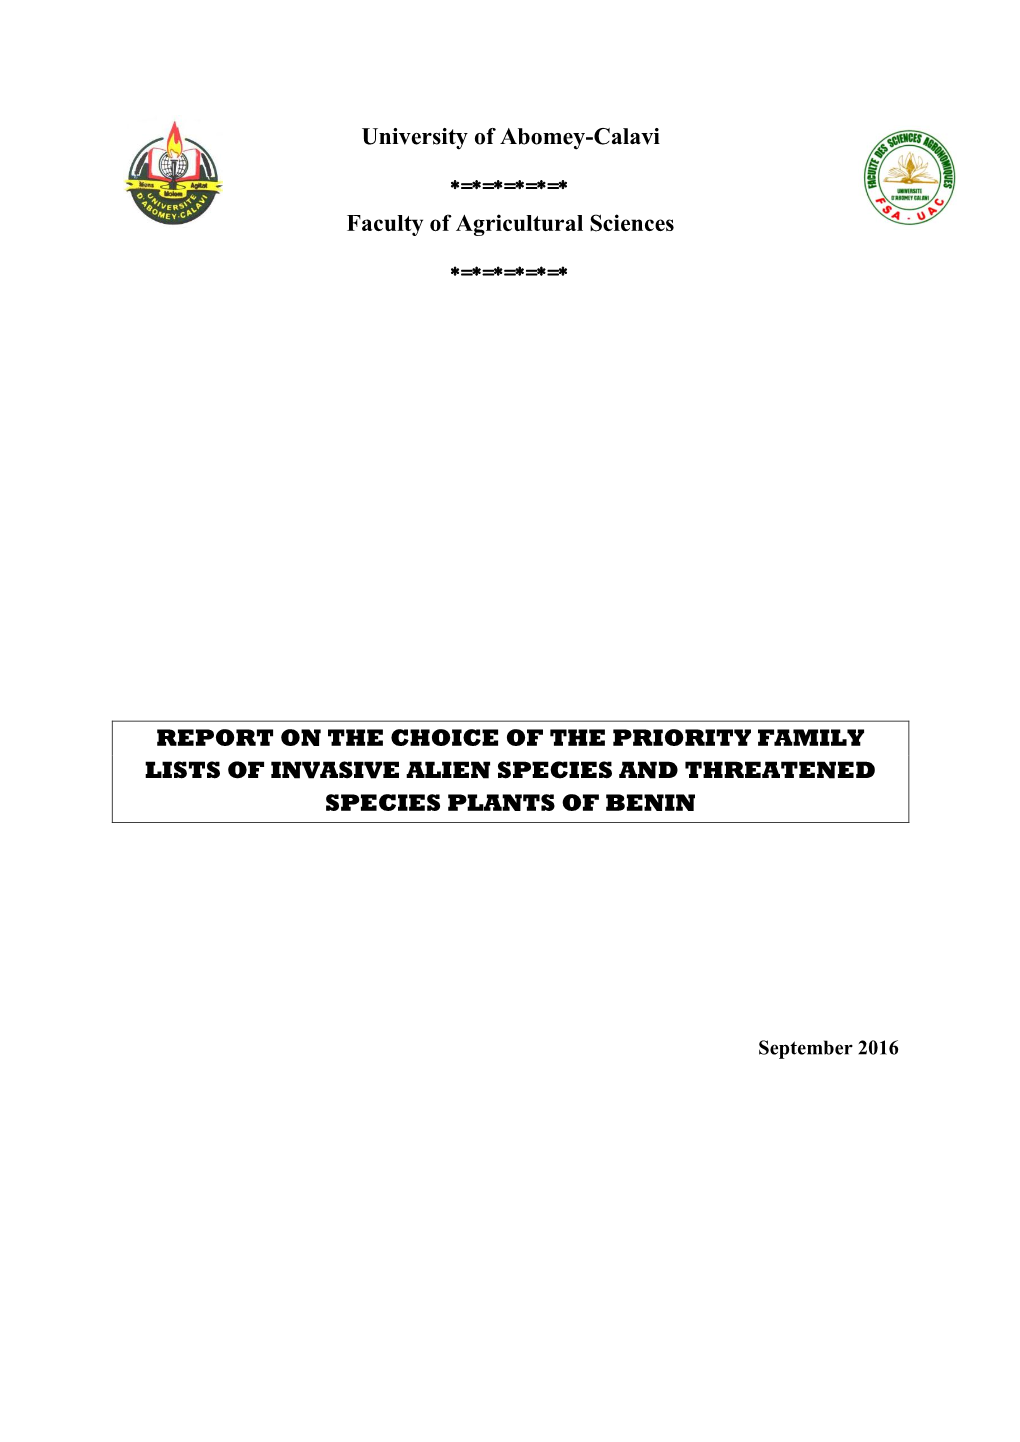 Report on the Choice of the Priority Family List of Invasive Alien Species and Threatened Species